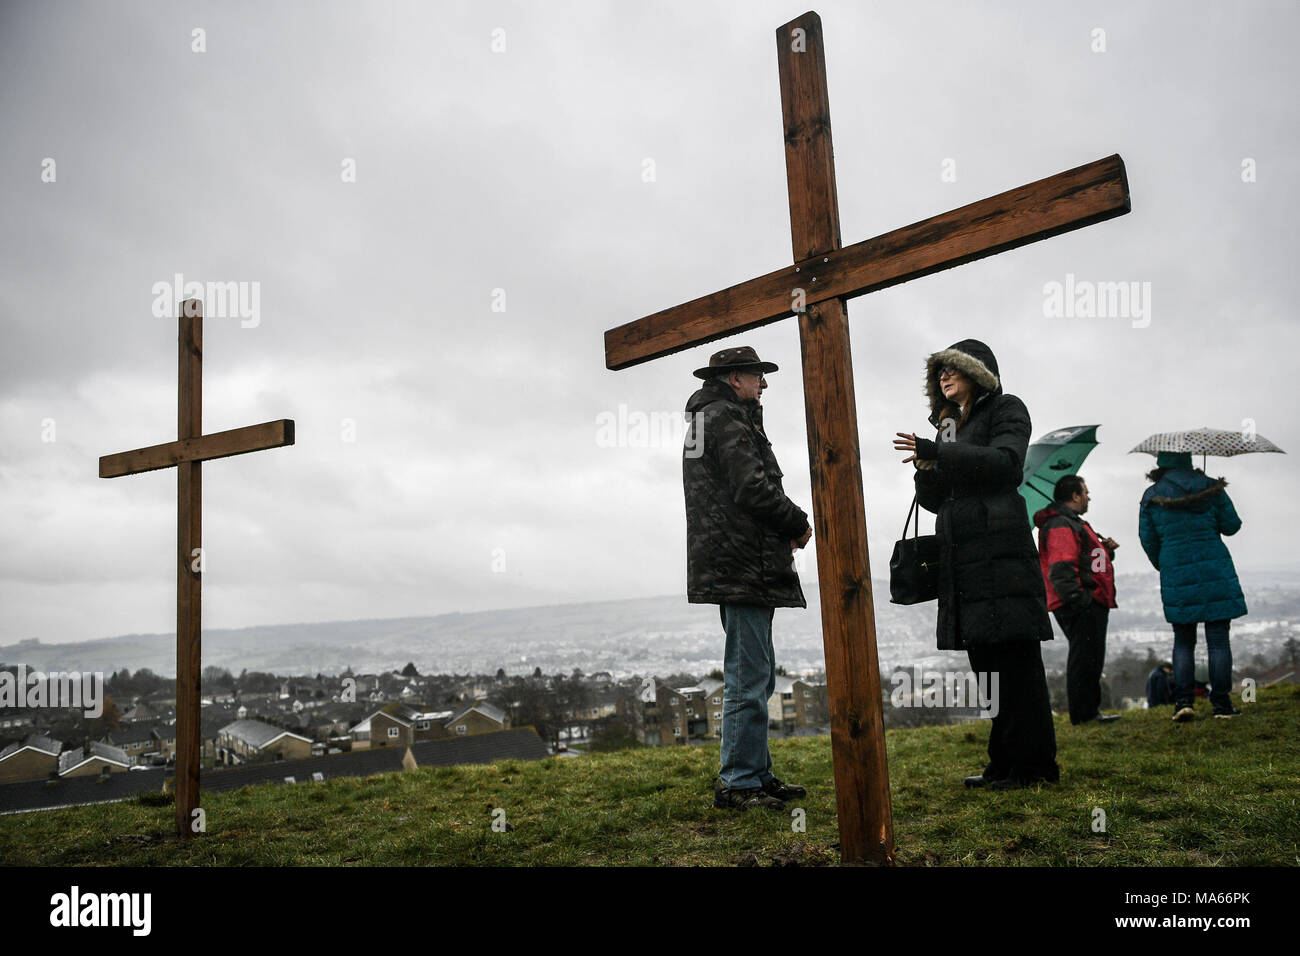 Wooden crosses are placed on top of Roundhill in Bath, Wiltshire, where several Christian Church congregations attend a hill-top service after taking part in the Walk of Witness to imitate the journey that Jesus took carrying his cross through the streets of Jerusalem on Good Friday. Stock Photo